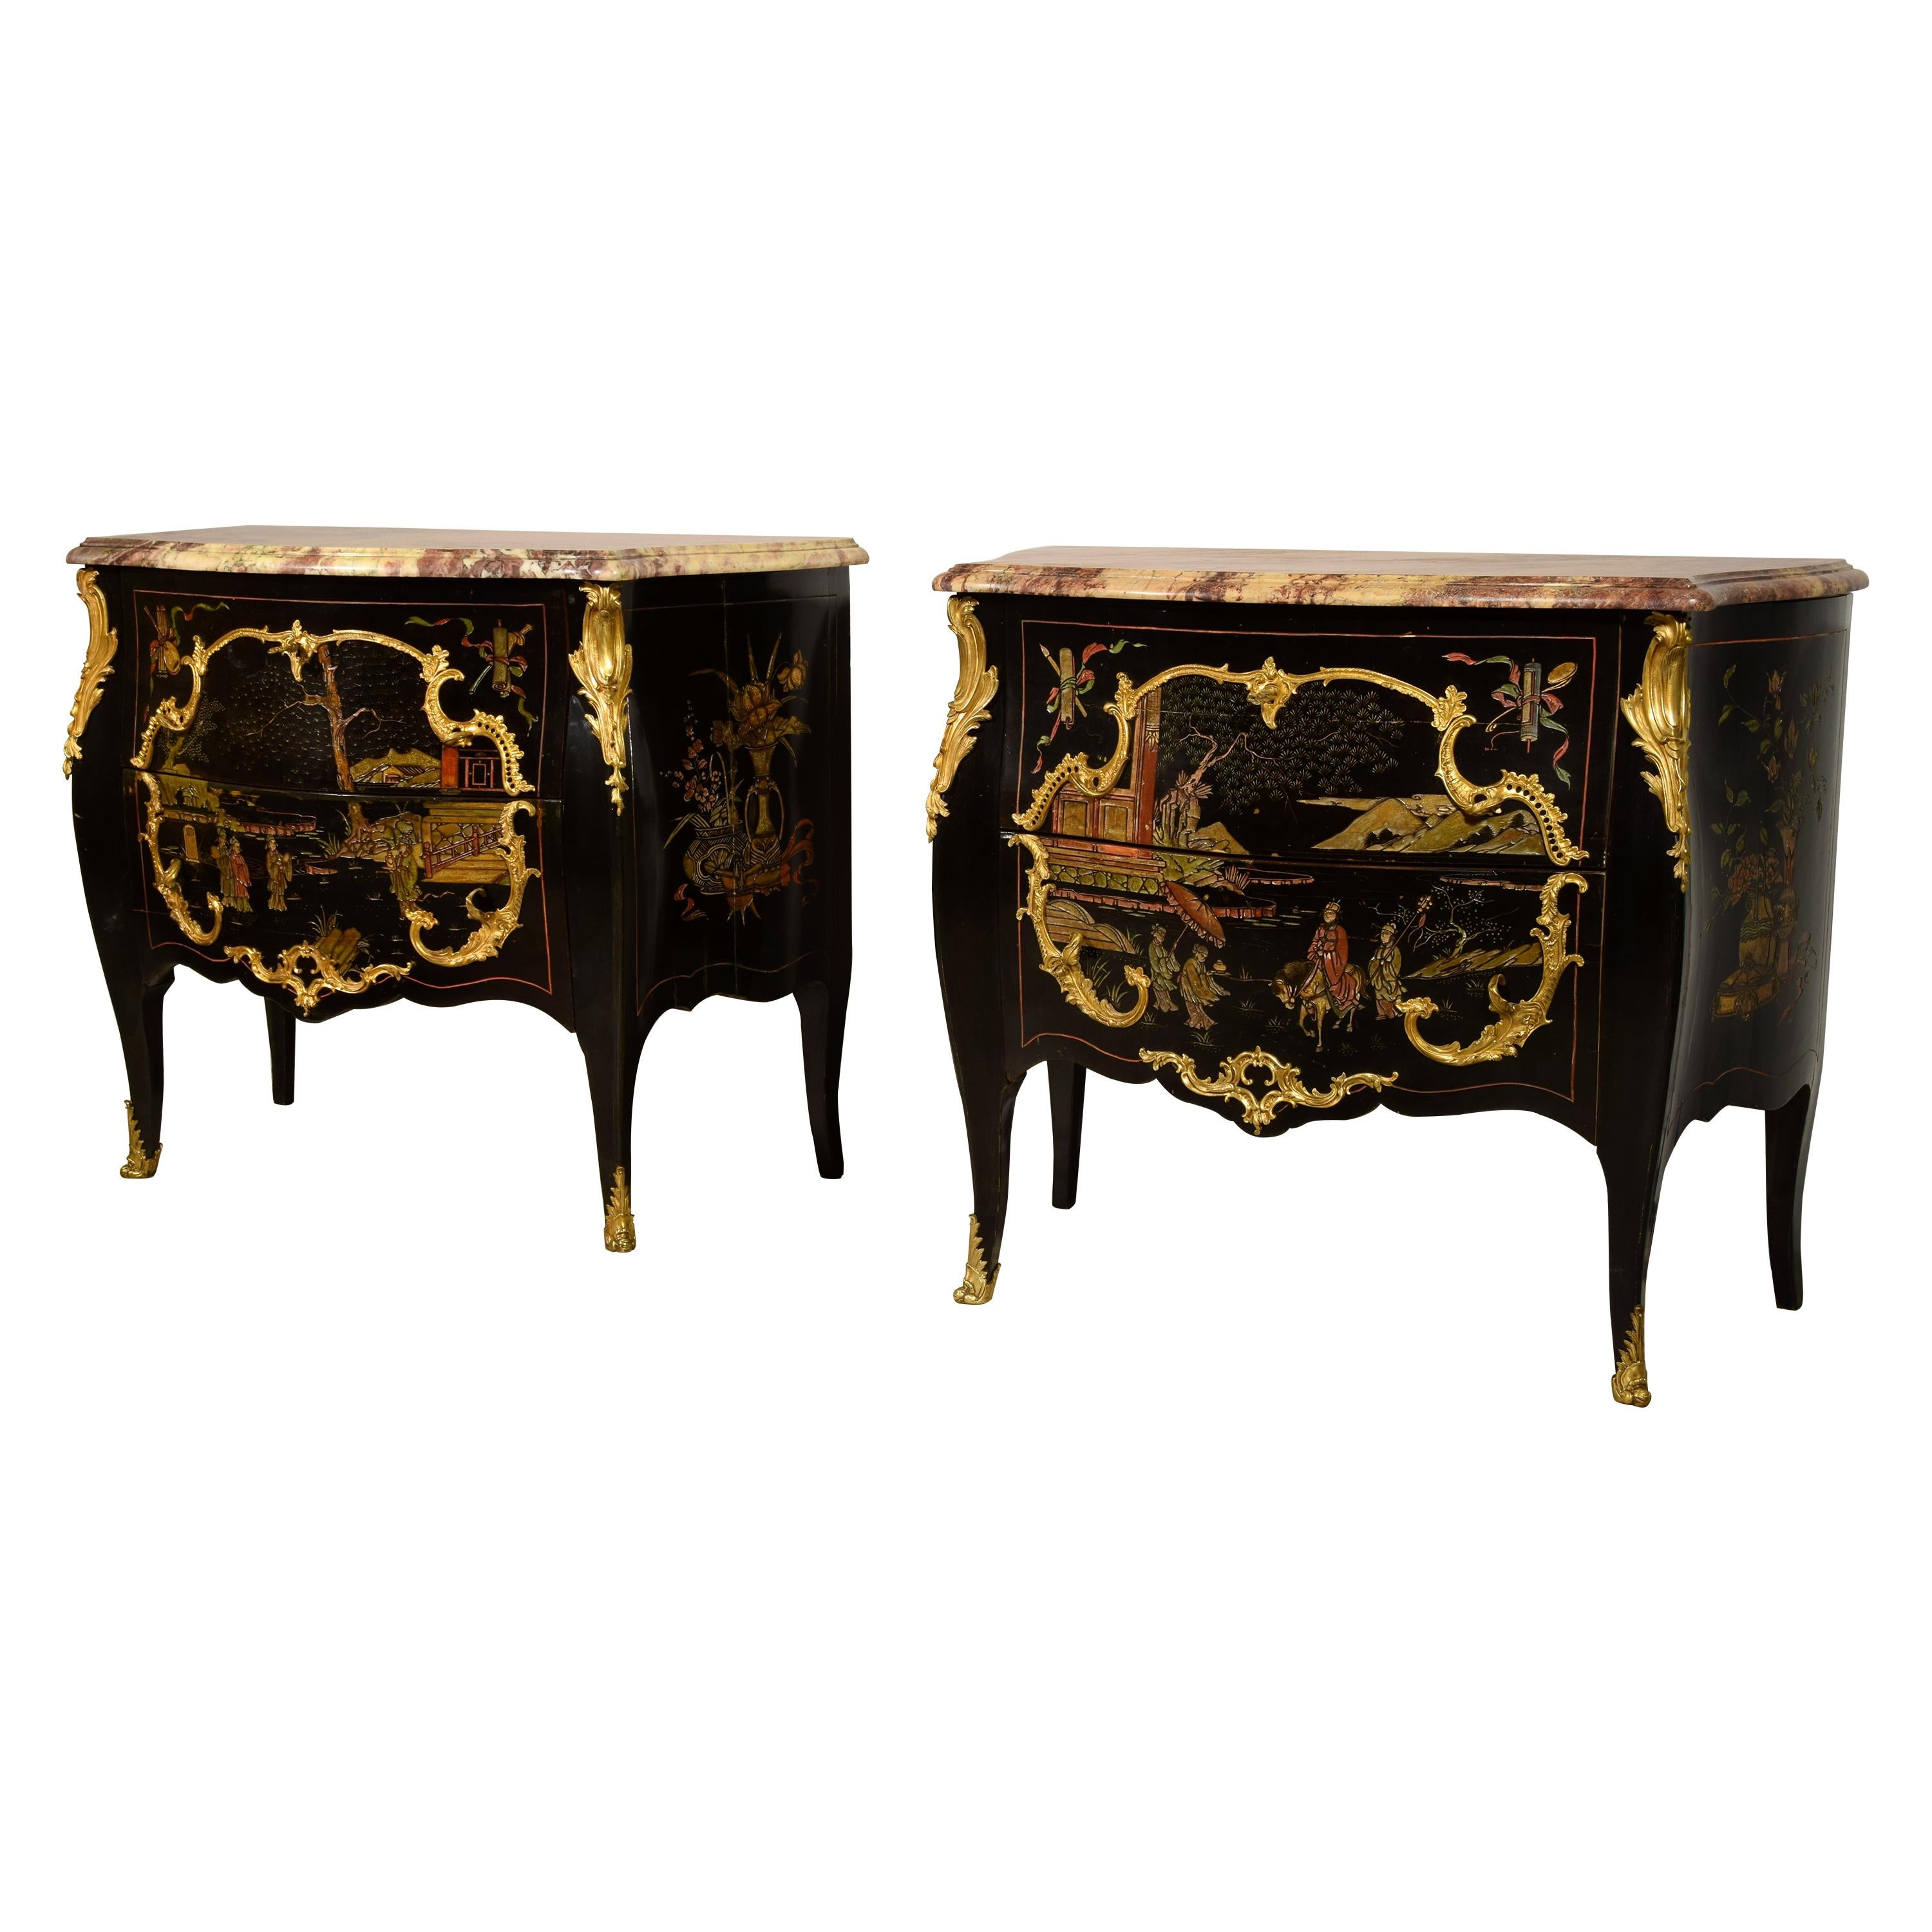 19th Century, Pair of French Chinoiserie Lacquered Commodes with Marble Top